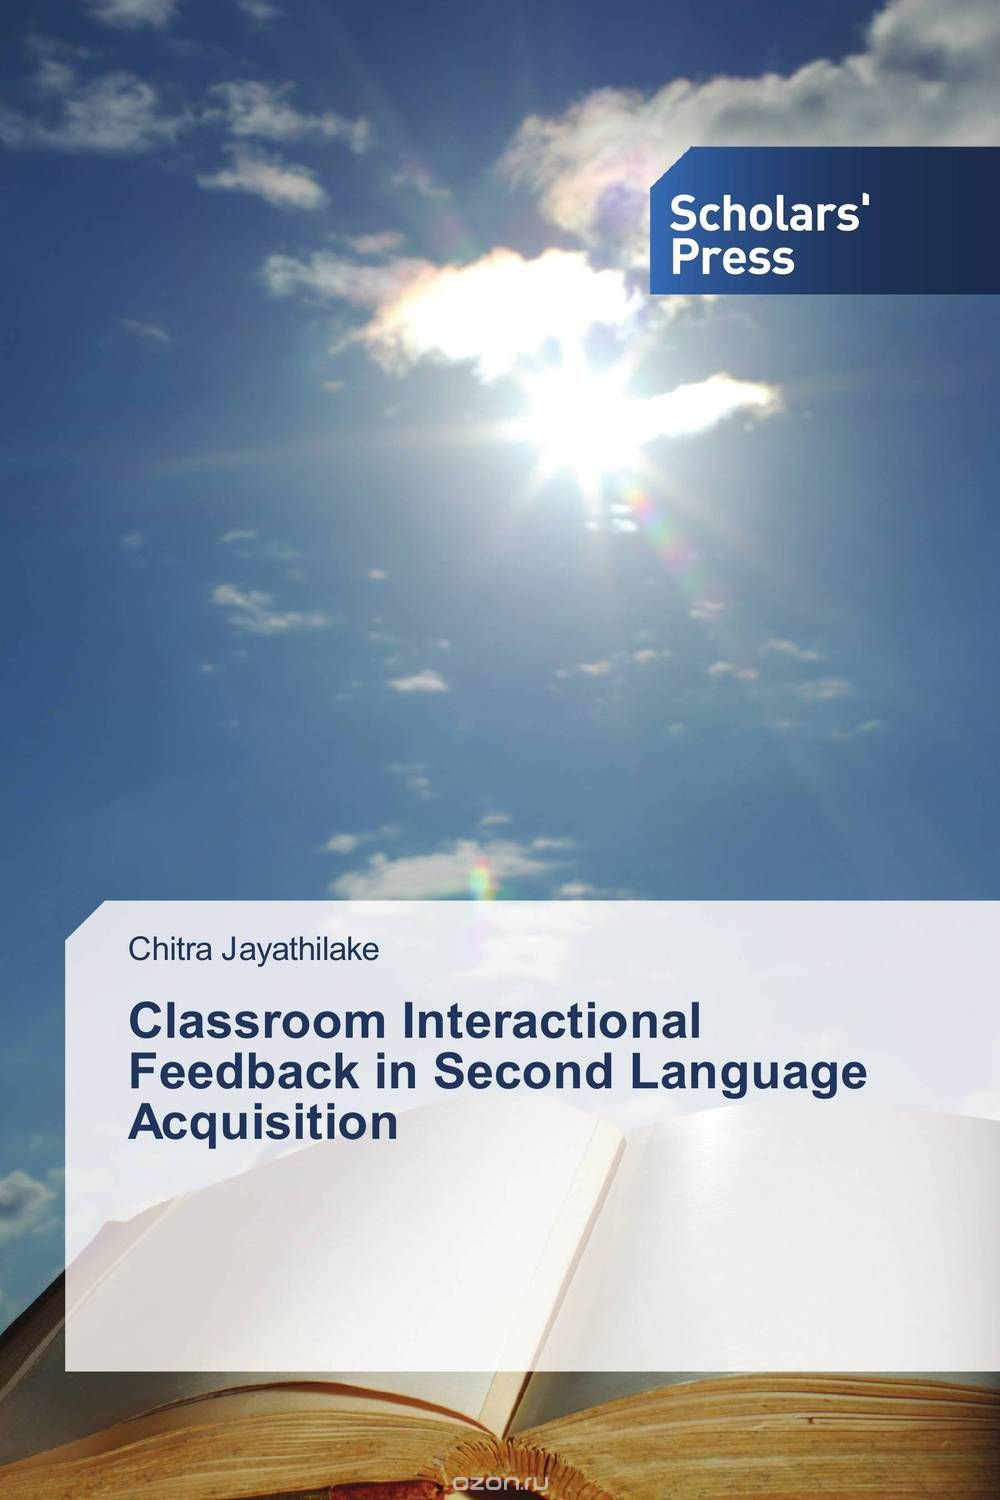 Classroom Interactional Feedback in Second Language Acquisition